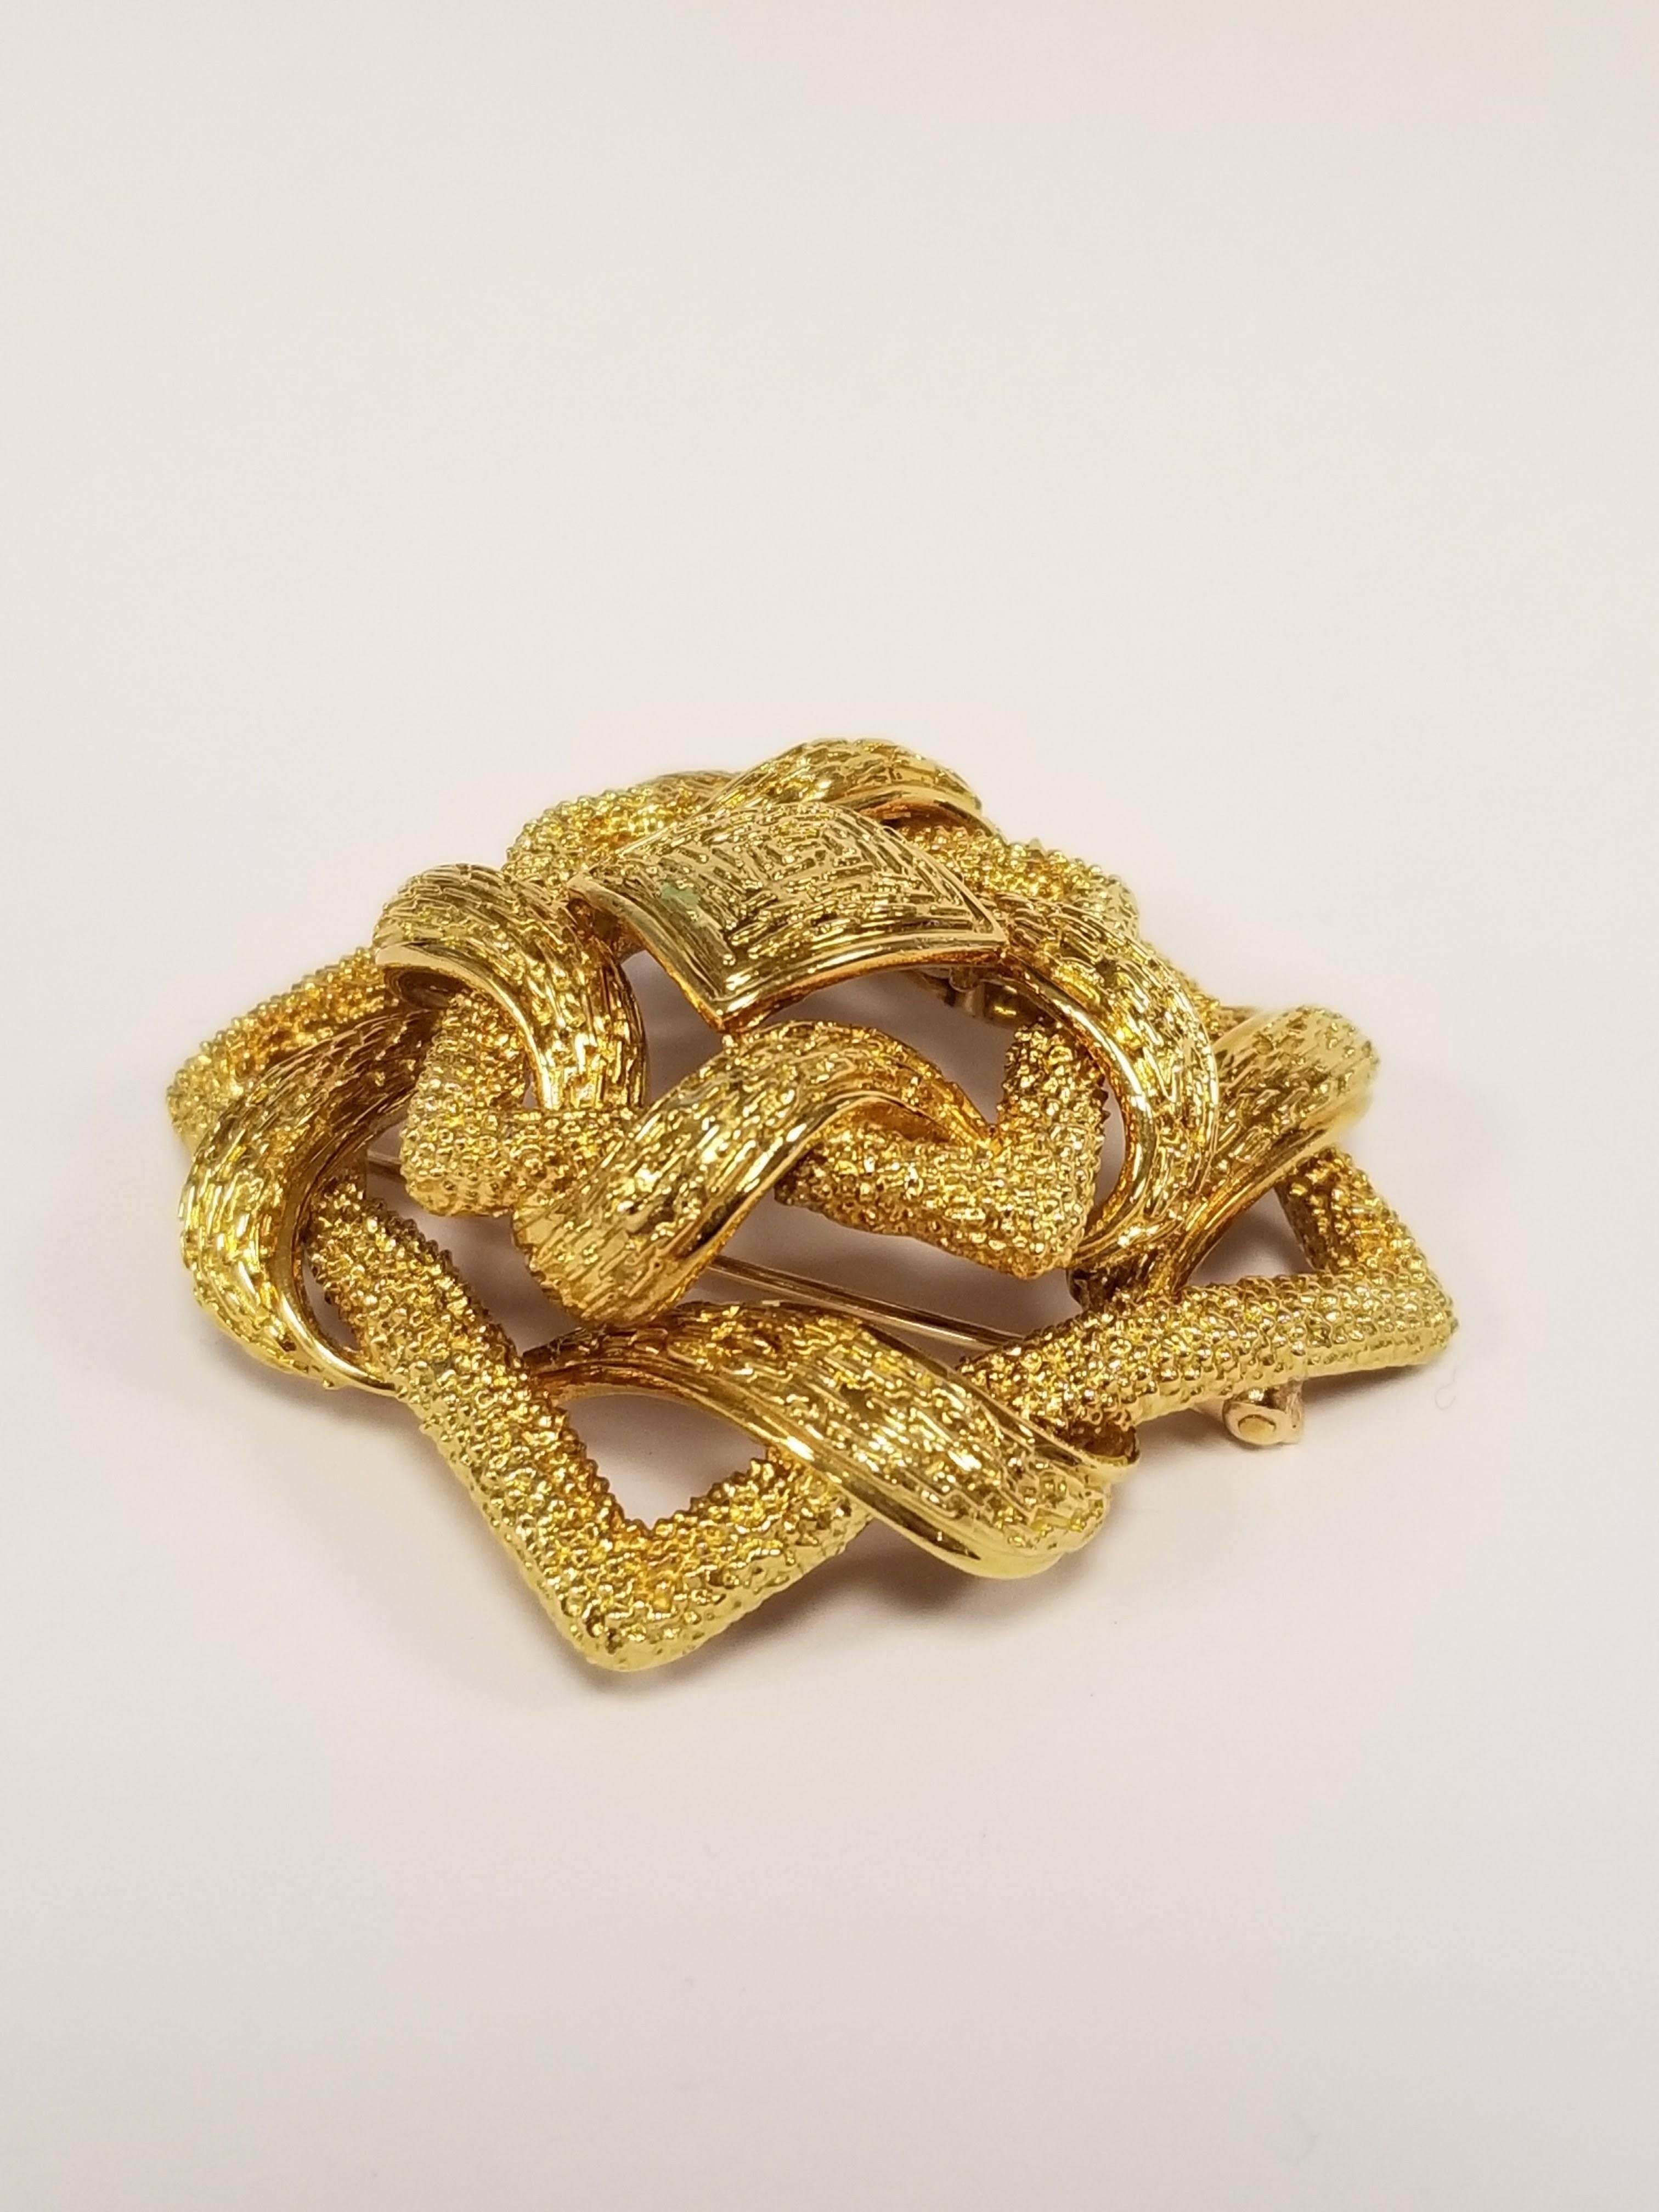 This bold Cartier brooch features a woven knot design, and radiates the peaceful energy of an ancient mandala. Rendered in richly textured gold, this Mid-Century Modern twist on a meditative motif features a marvelously tactile surface and